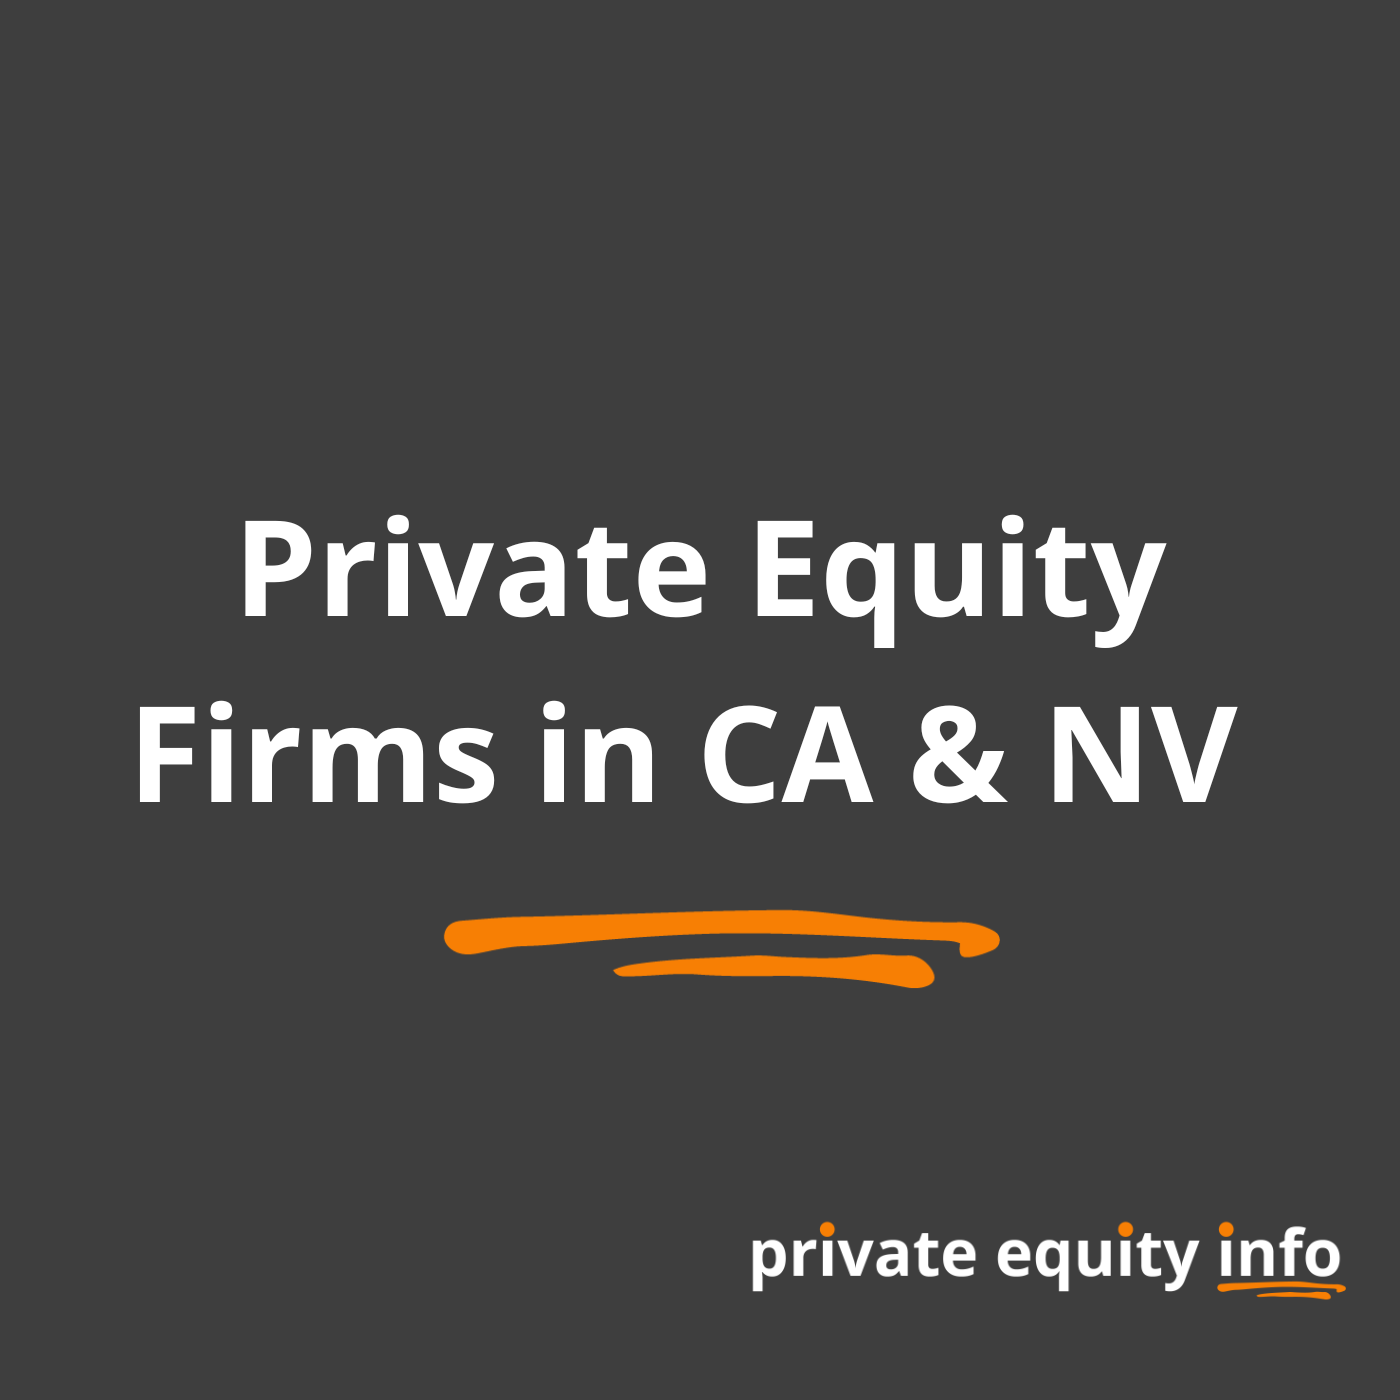 Private Equity Firms in California and Nevada